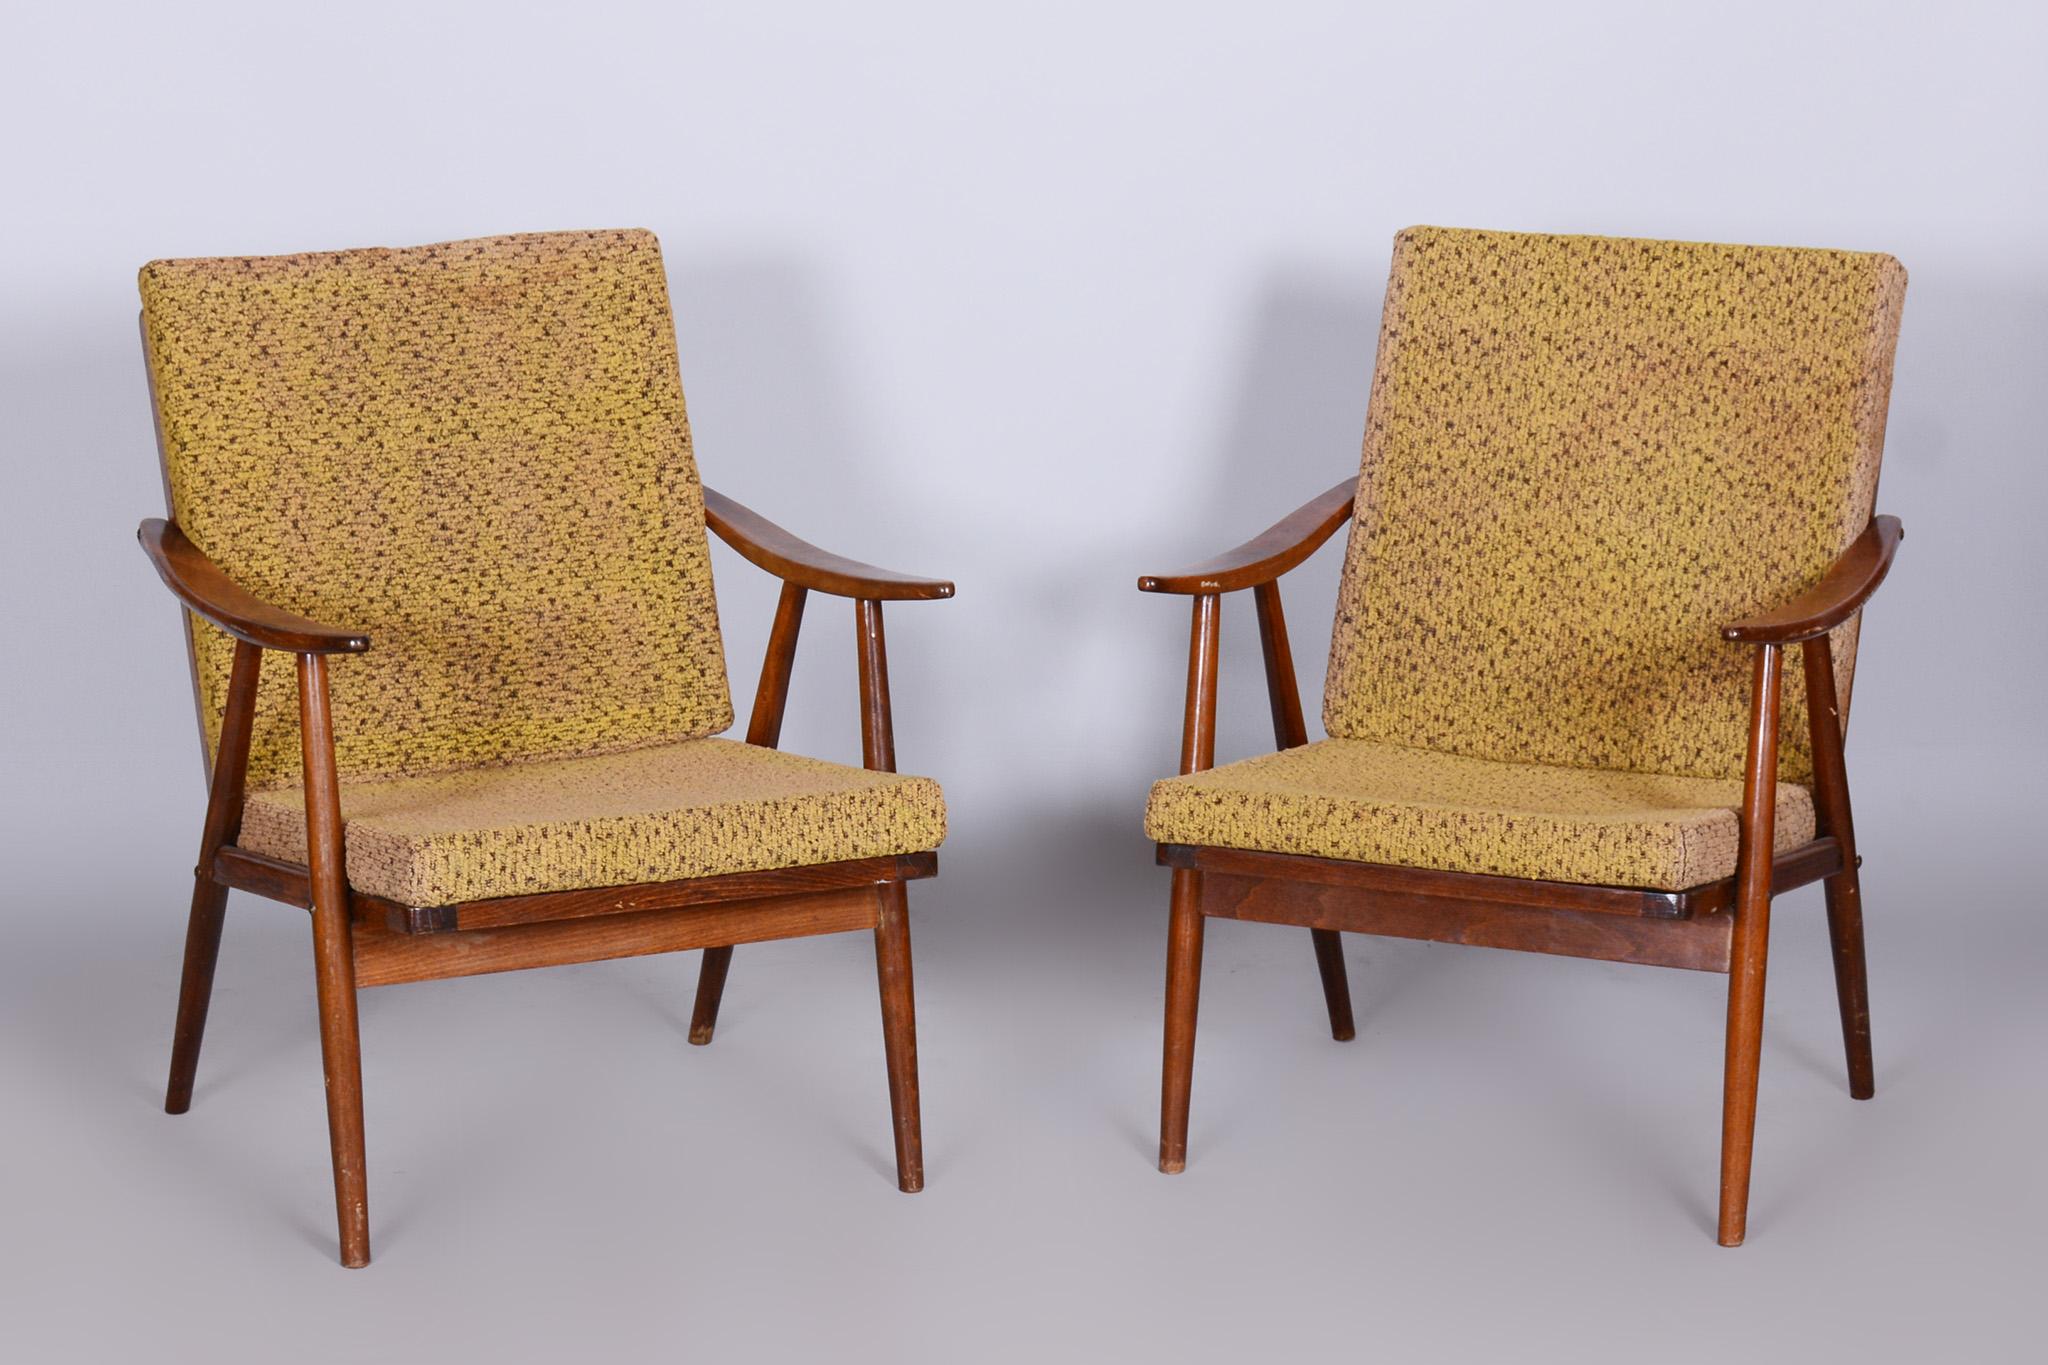 Pair of midcentury beech armschairs.

Maker: ÚLUV - Center for Folk Art Production
Period: 1960-1969
Source: Czechia
Material: Beech

Very well preserved condition. Revived polish.
Upholstery has been professionally cleaned.